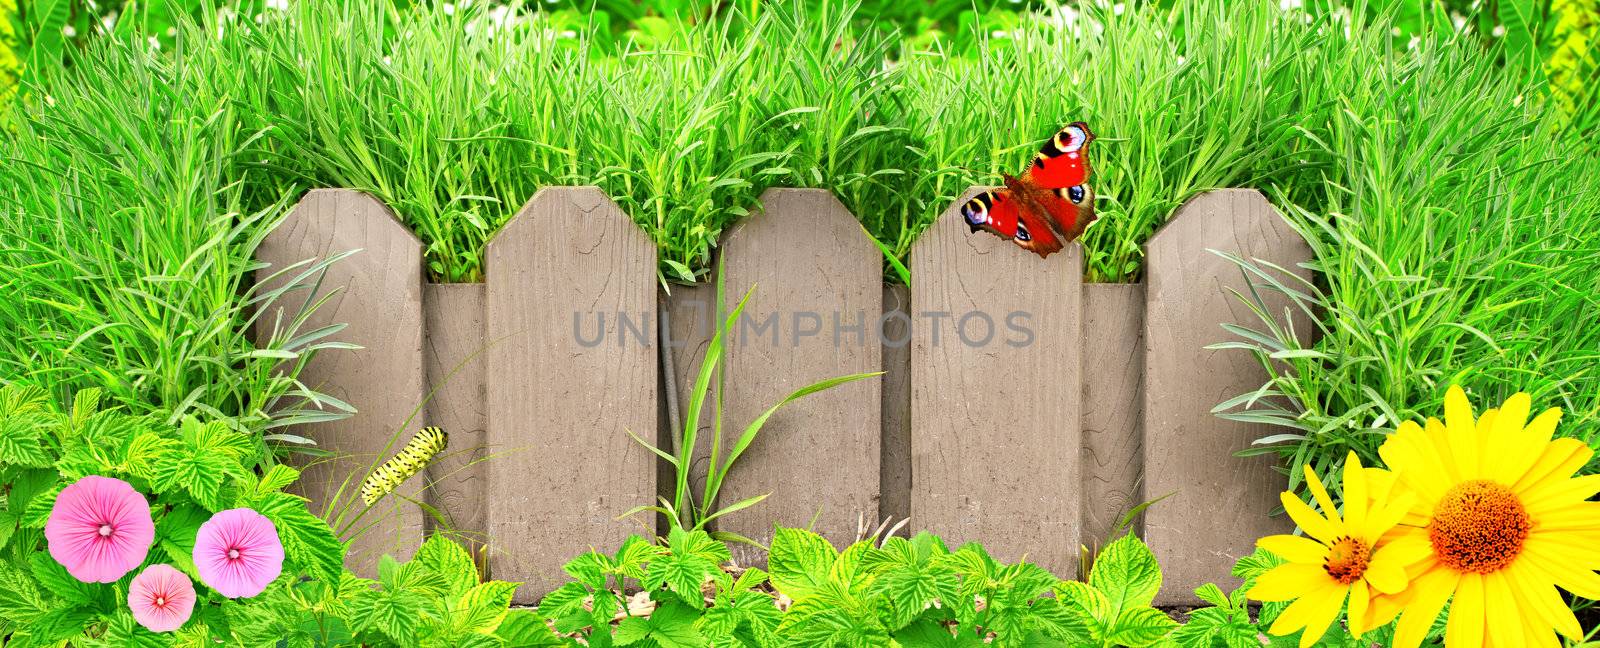 Wooden fence, flowers and green grass by frenta